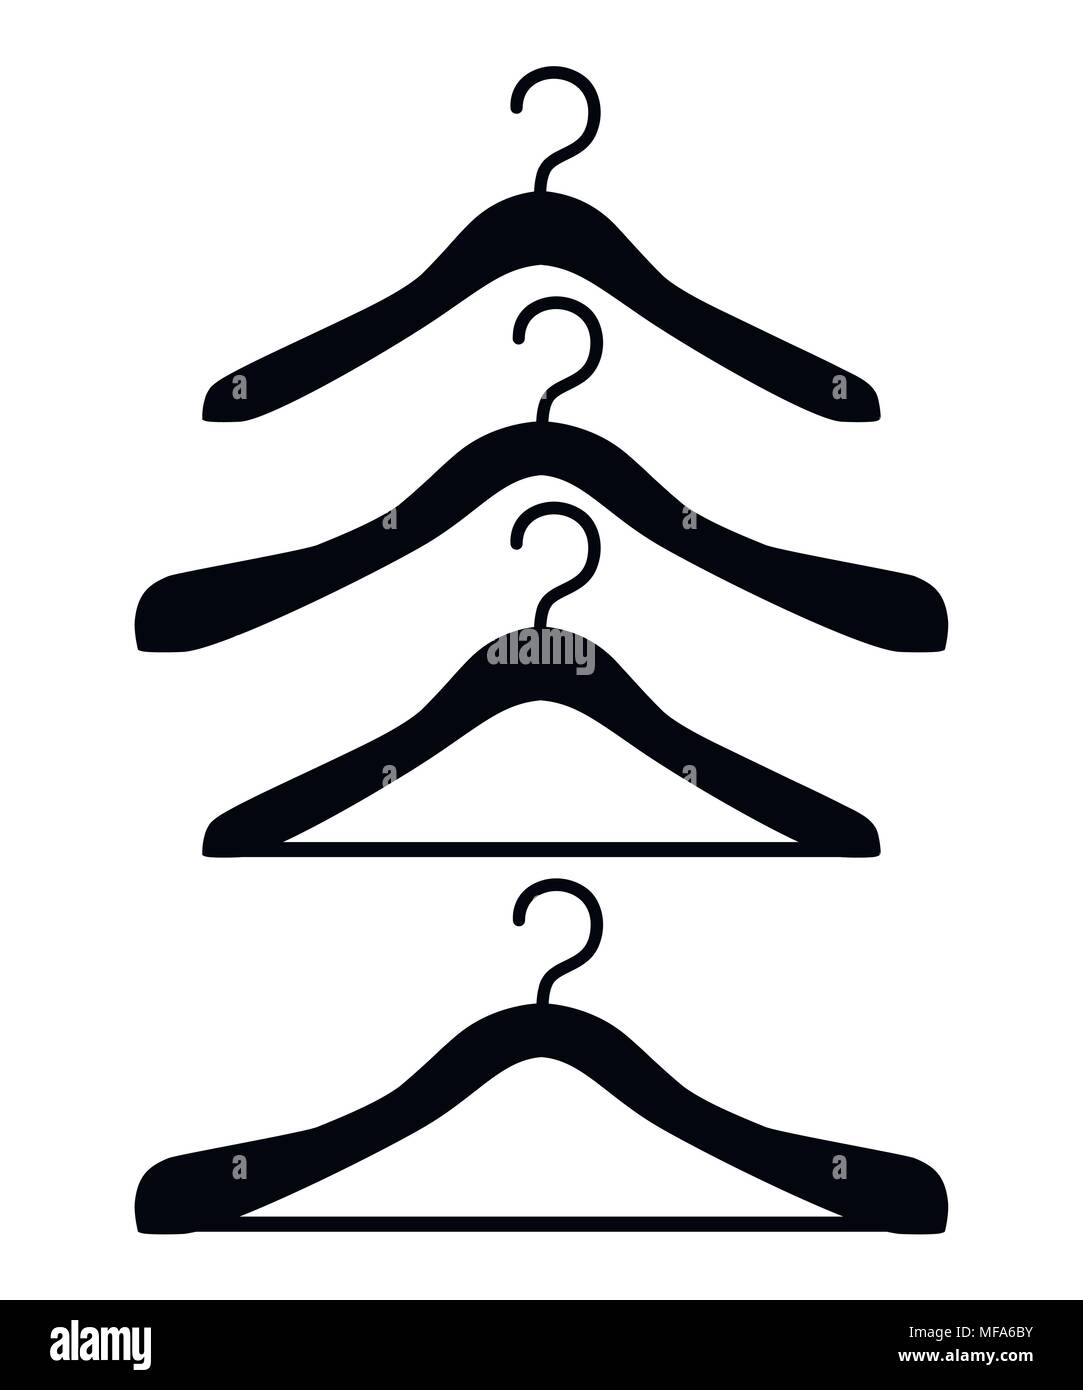 https://c8.alamy.com/comp/MFA6BY/black-silhouette-set-of-wooden-hanger-four-different-hangers-flat-style-design-vector-illustration-isolated-on-white-background-web-site-page-and-MFA6BY.jpg